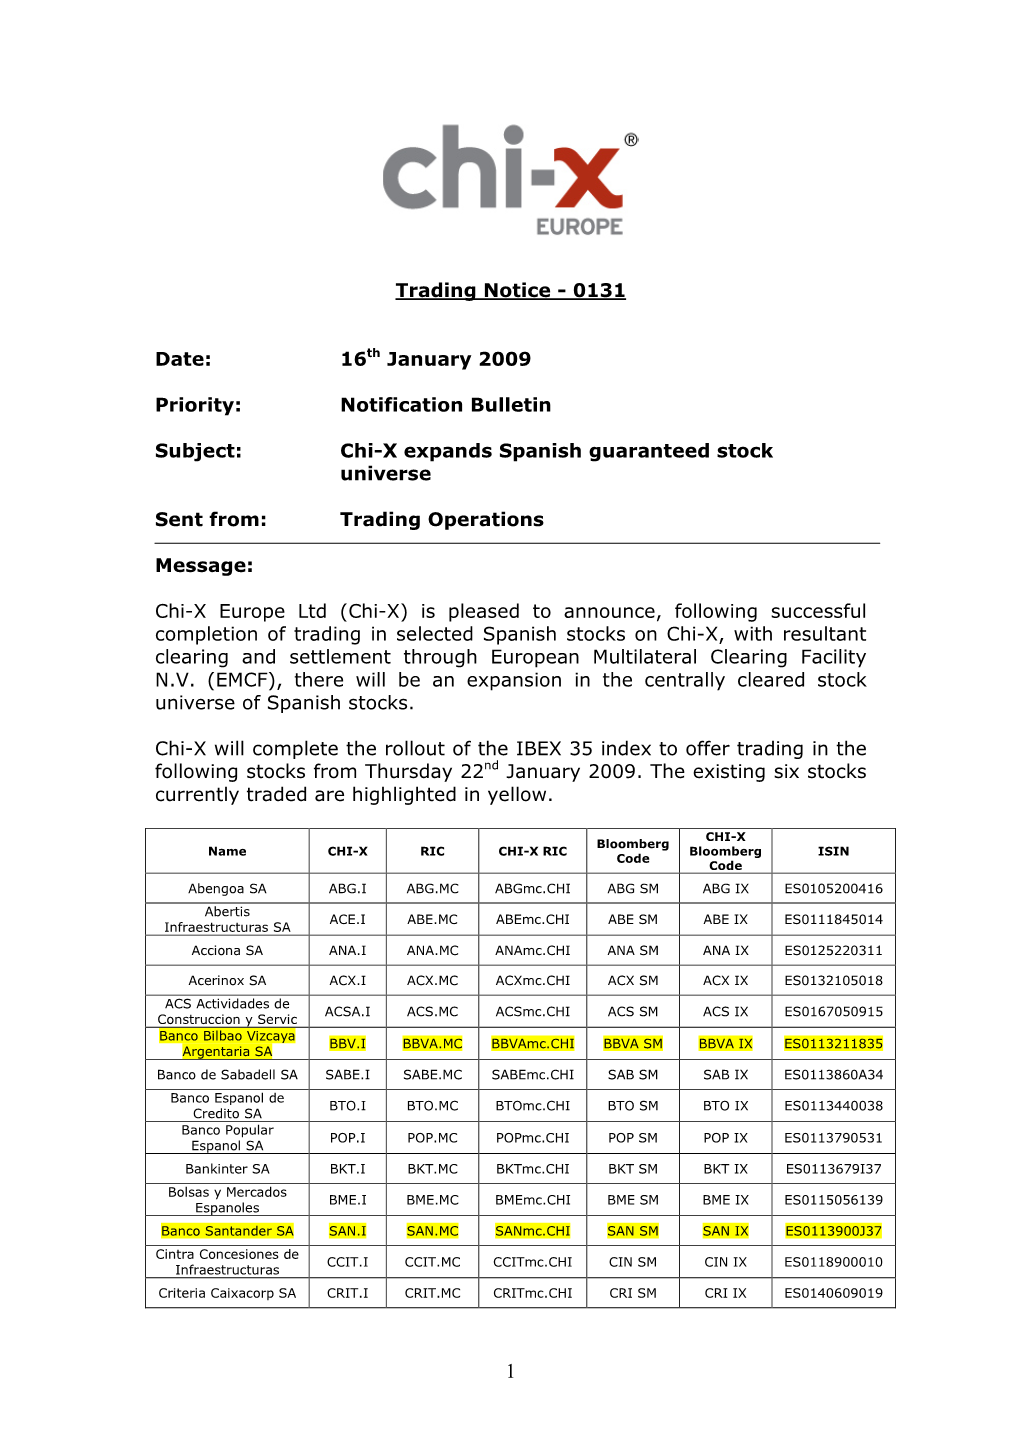 20090116 Trading Notice Functional 0131